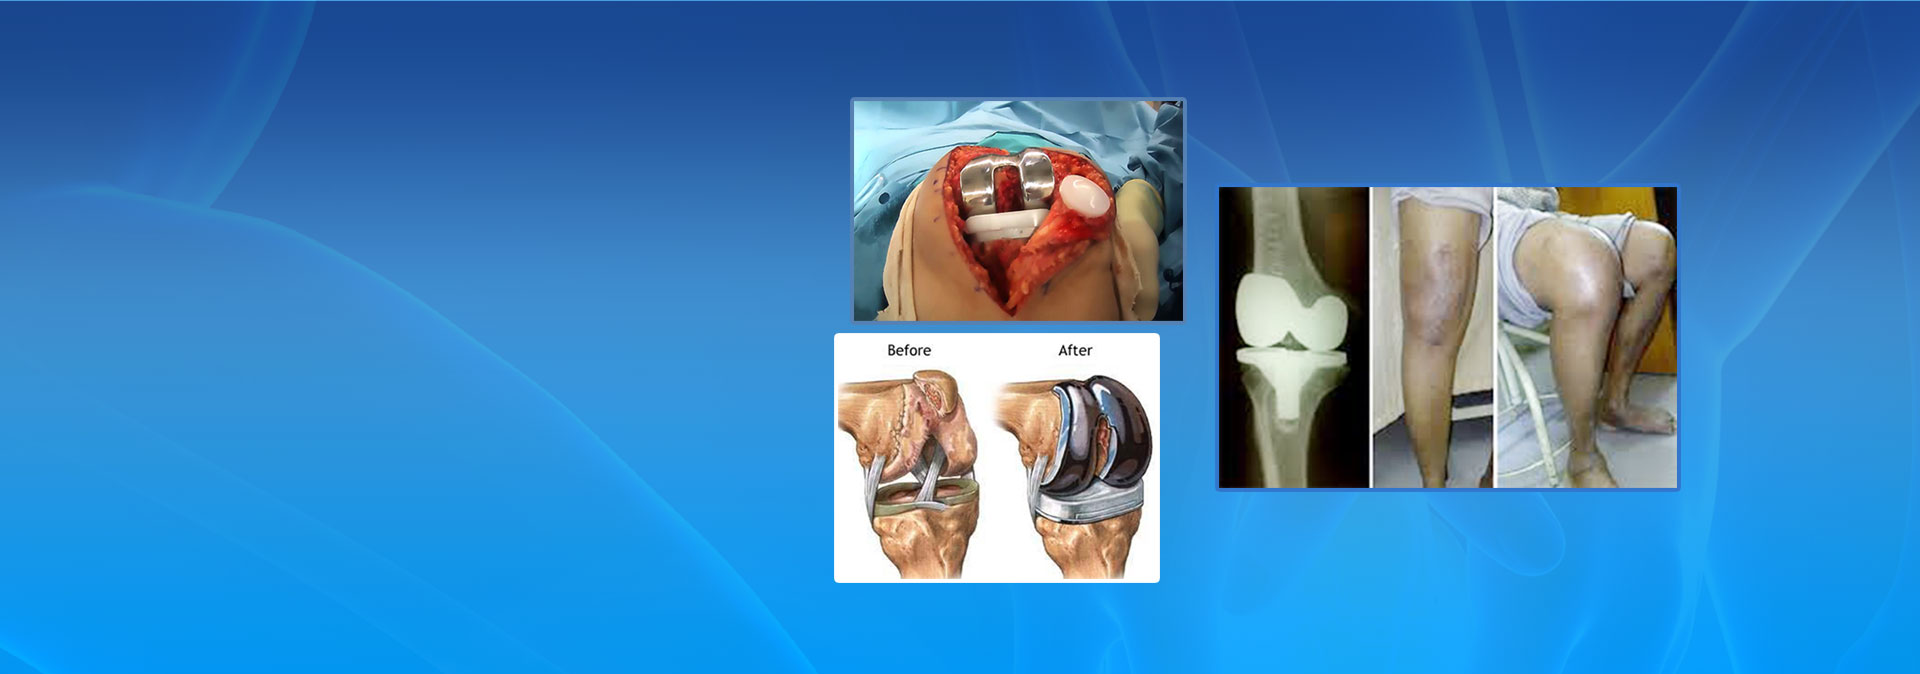 knee replacement image